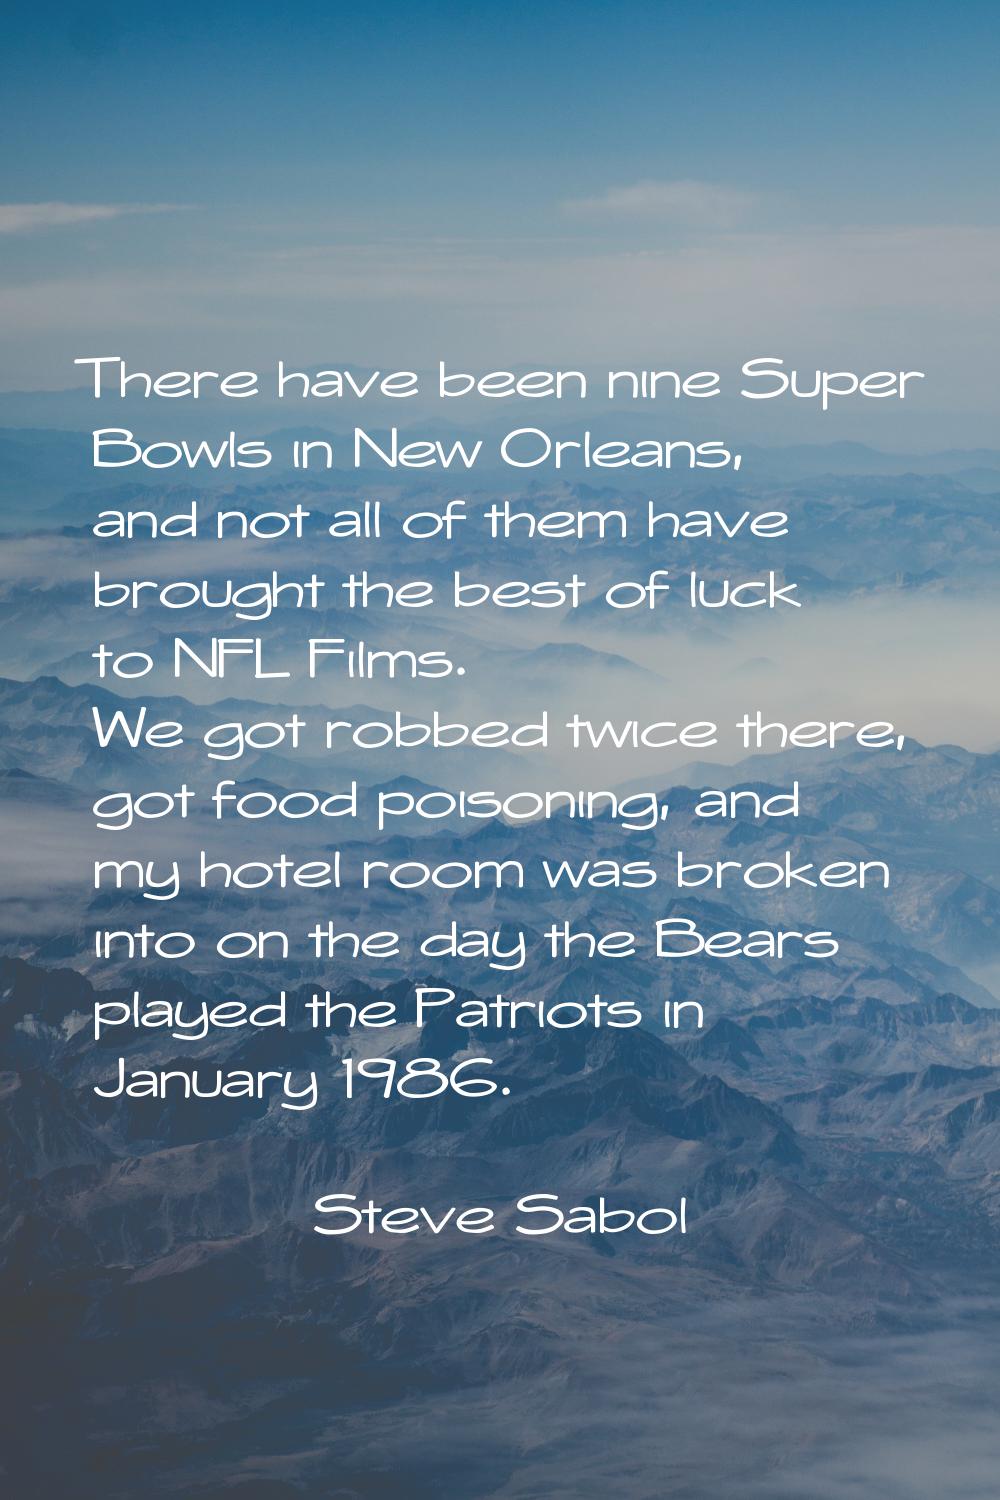 There have been nine Super Bowls in New Orleans, and not all of them have brought the best of luck 